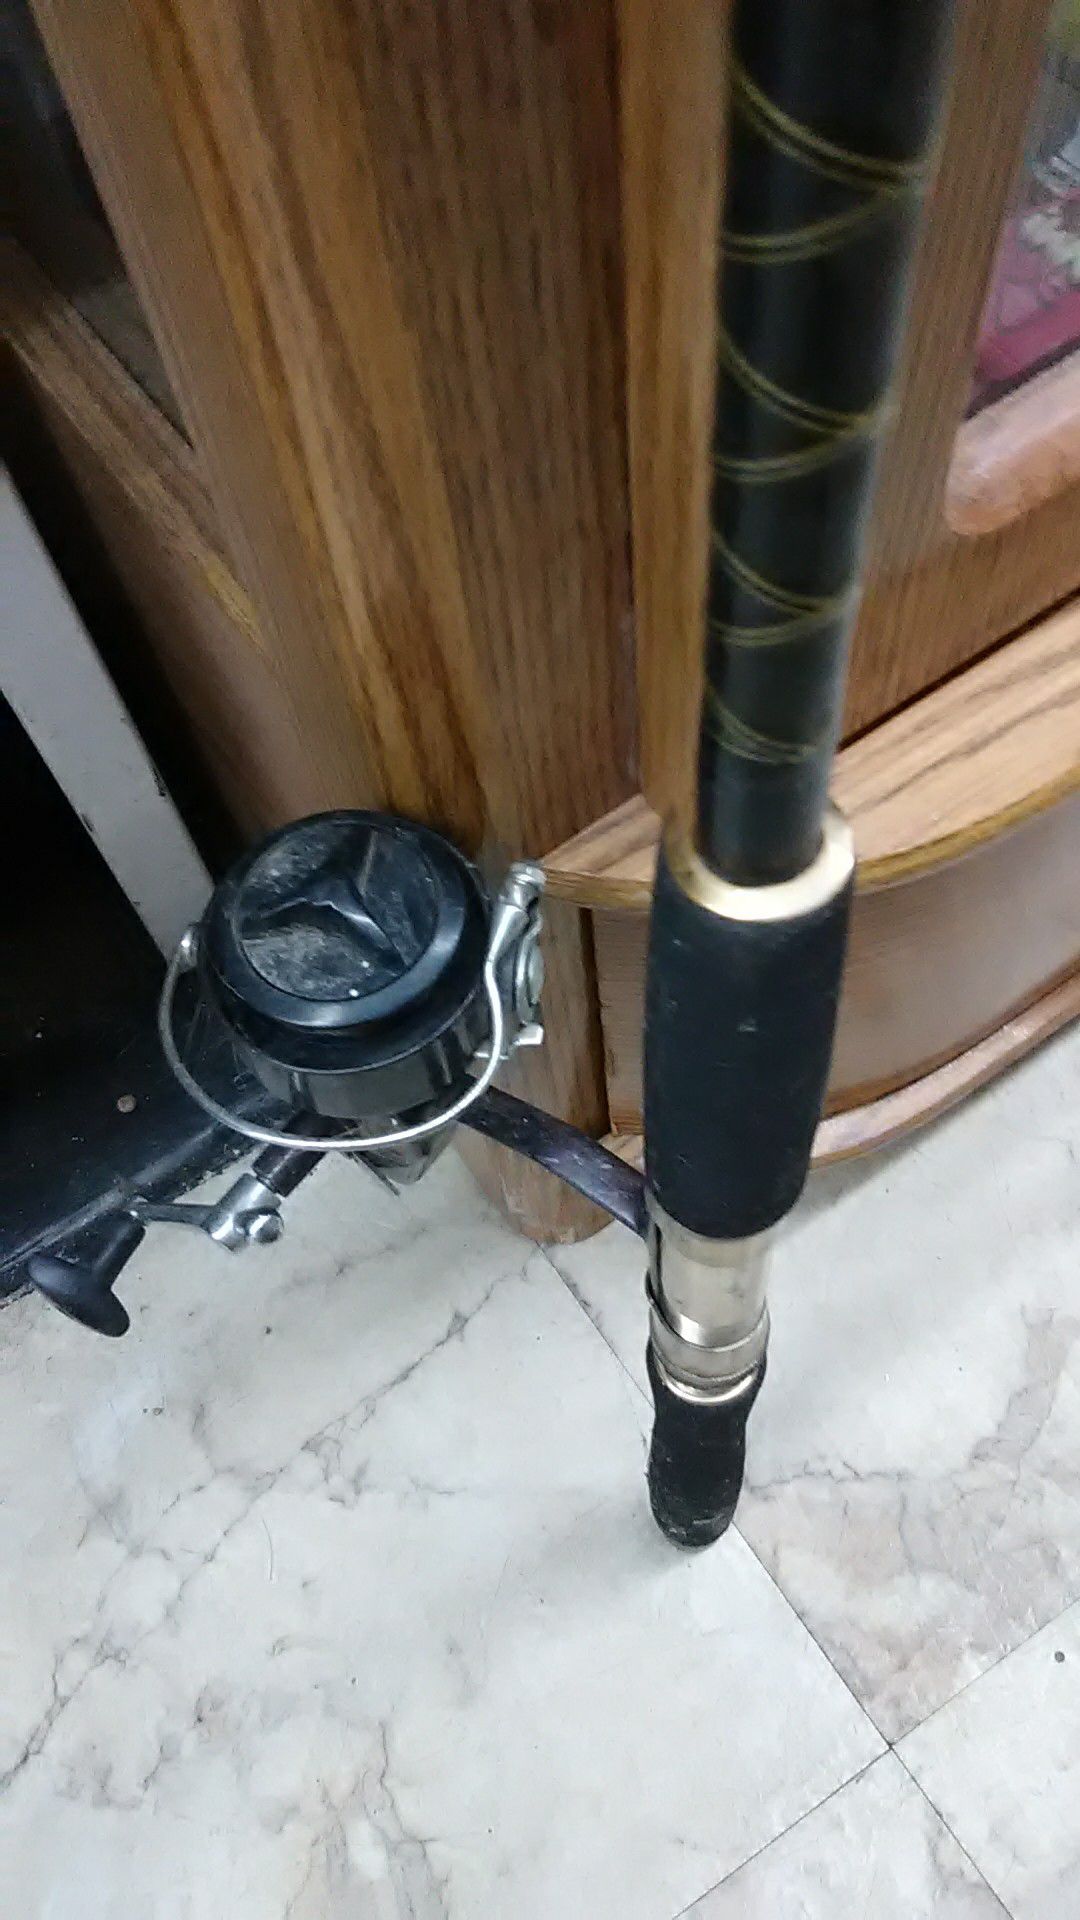 Old fishing rod and reel. Garcia